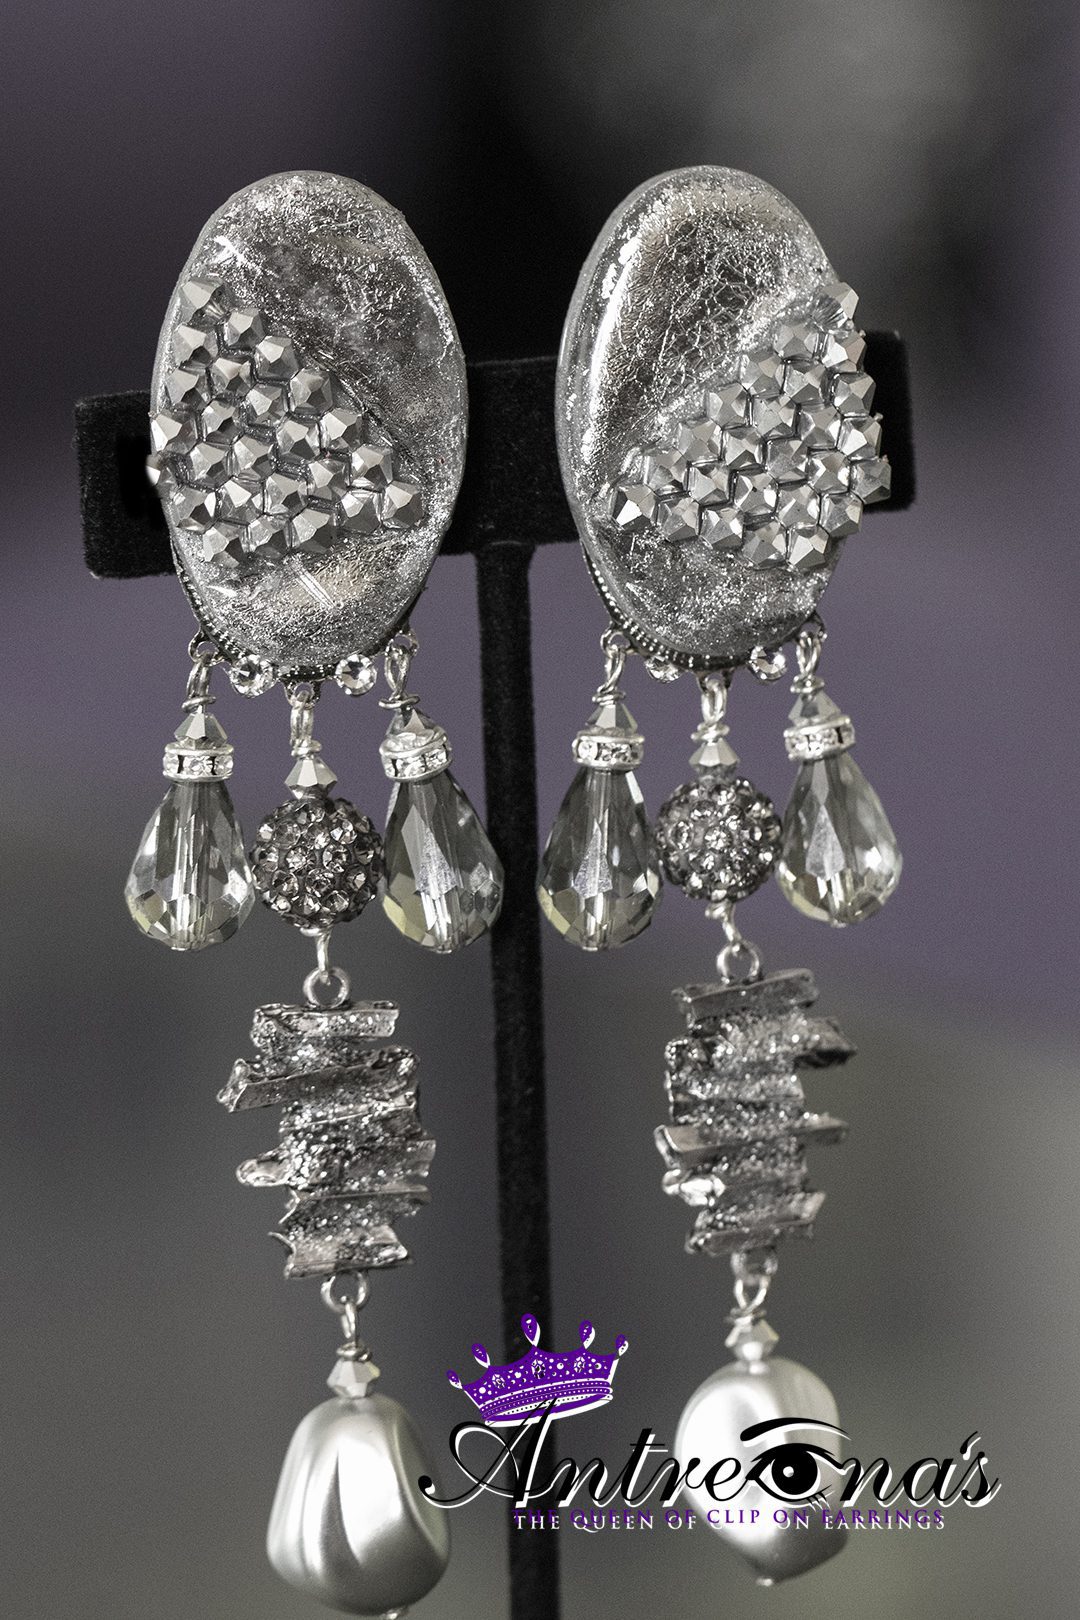 Image: Comfy clip earrings